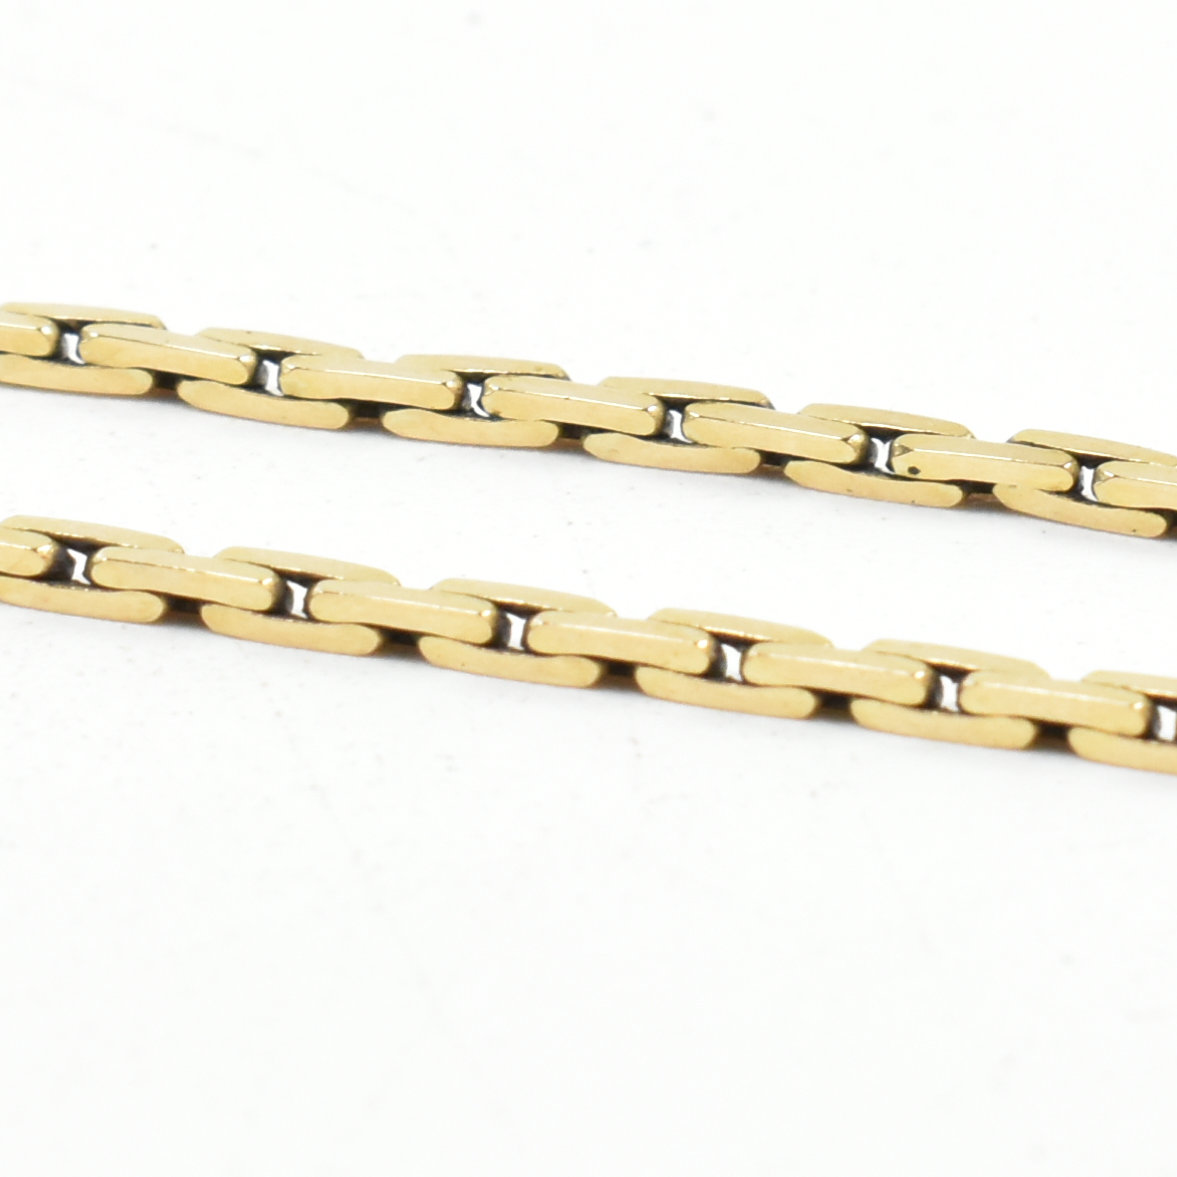 HALLMARKED 9CT GOLD FANCY FLAT LINK CHAIN - Image 4 of 5